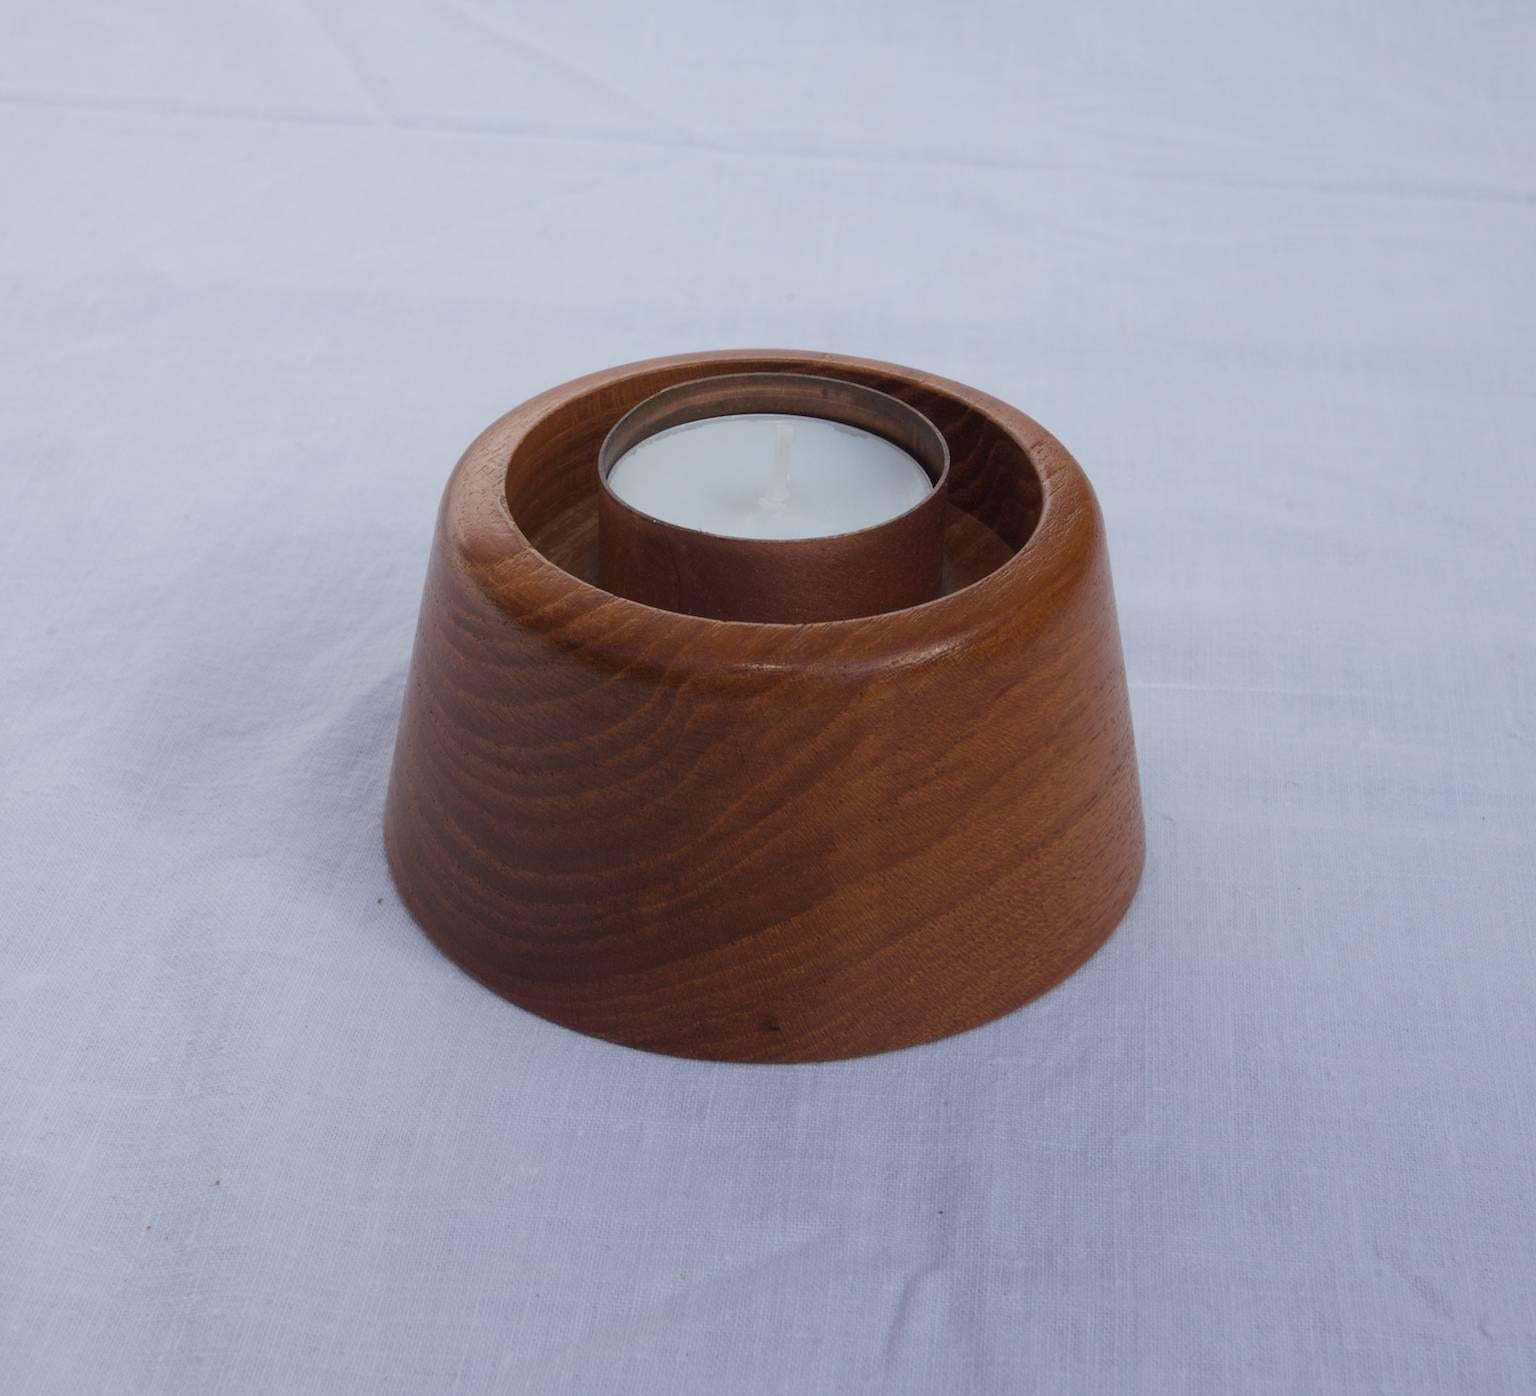 Mid-20th Century Candleholder, Teak, Glass and Copper by Karl Holmberg 1960s-1970s, Swedish For Sale